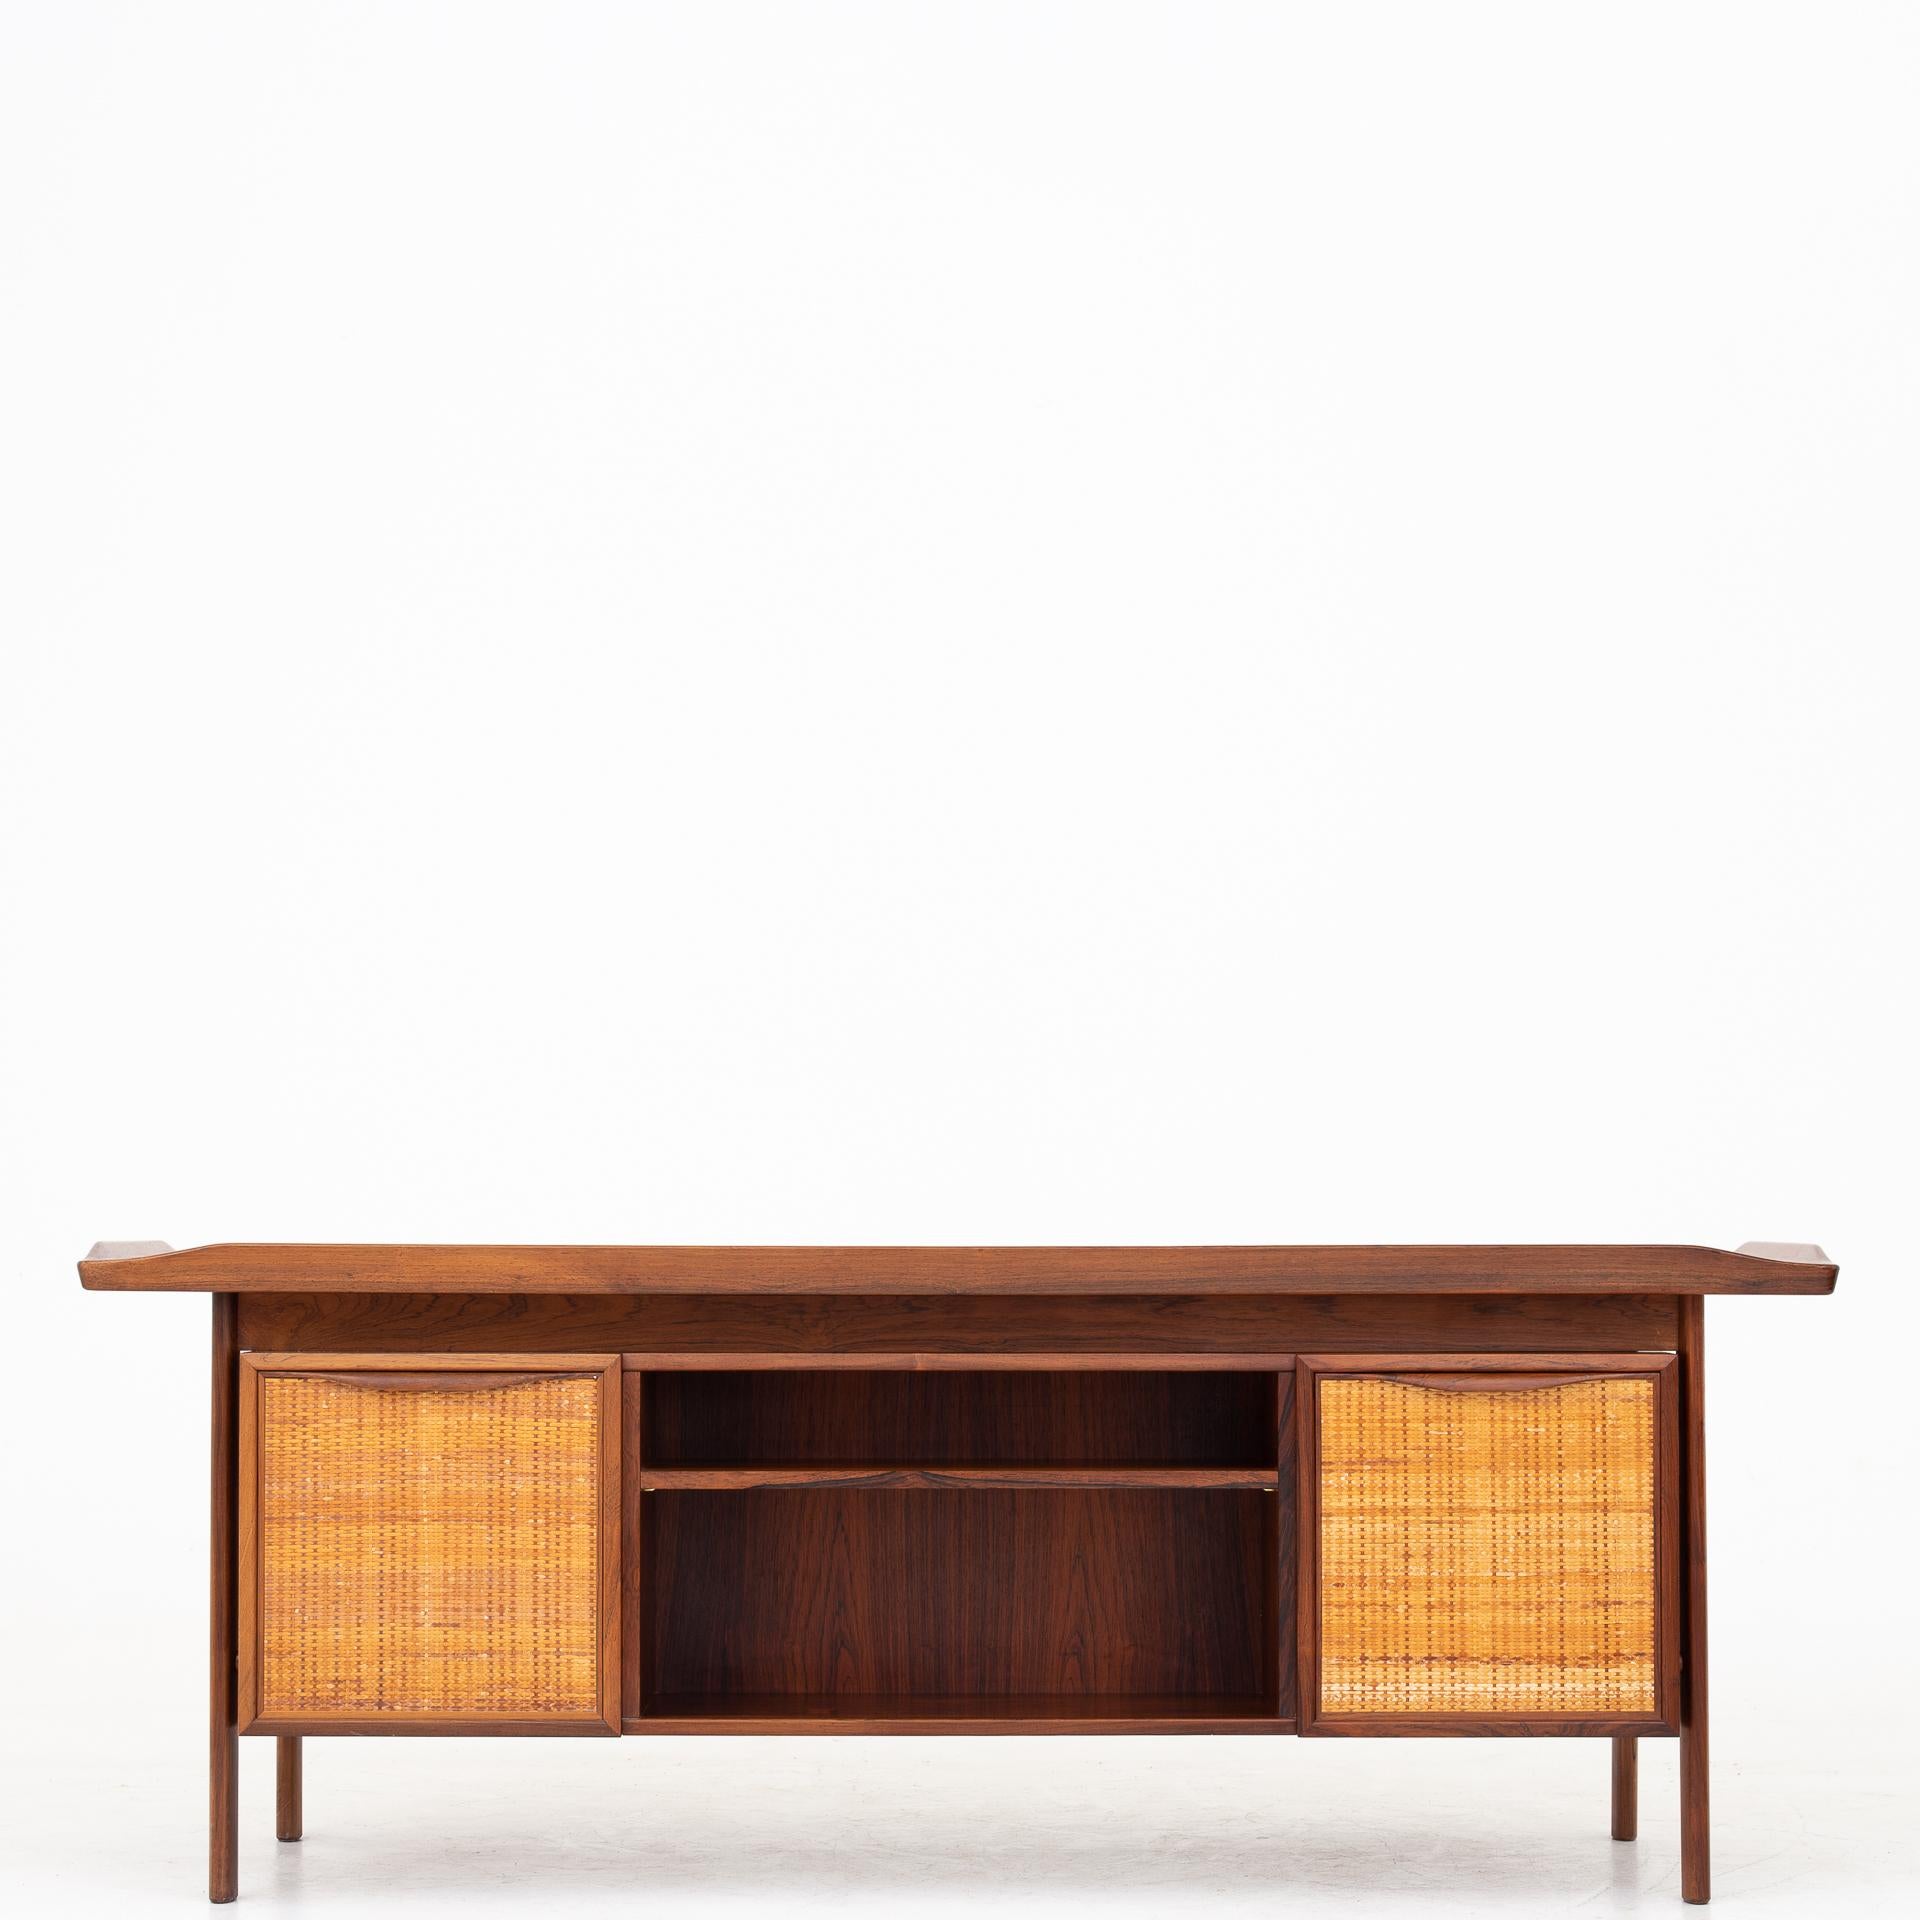 Desk in rosewood with cane doors. Unknown designer.